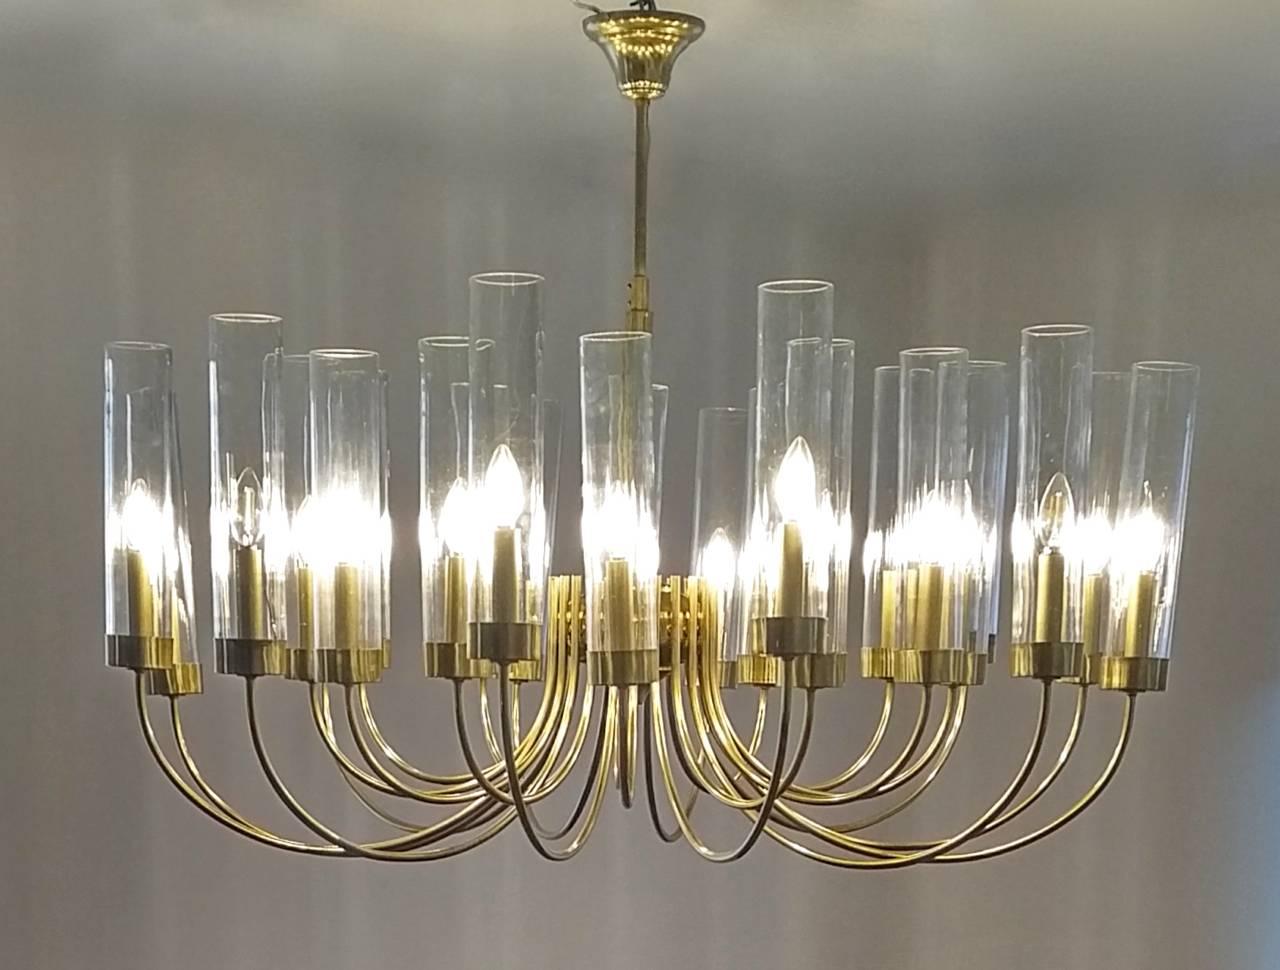 An impressive Mid-Century chandelier from Italy with 24 curved arms in two sections, one inner and one outer. Handblown Murano glass cylinders.